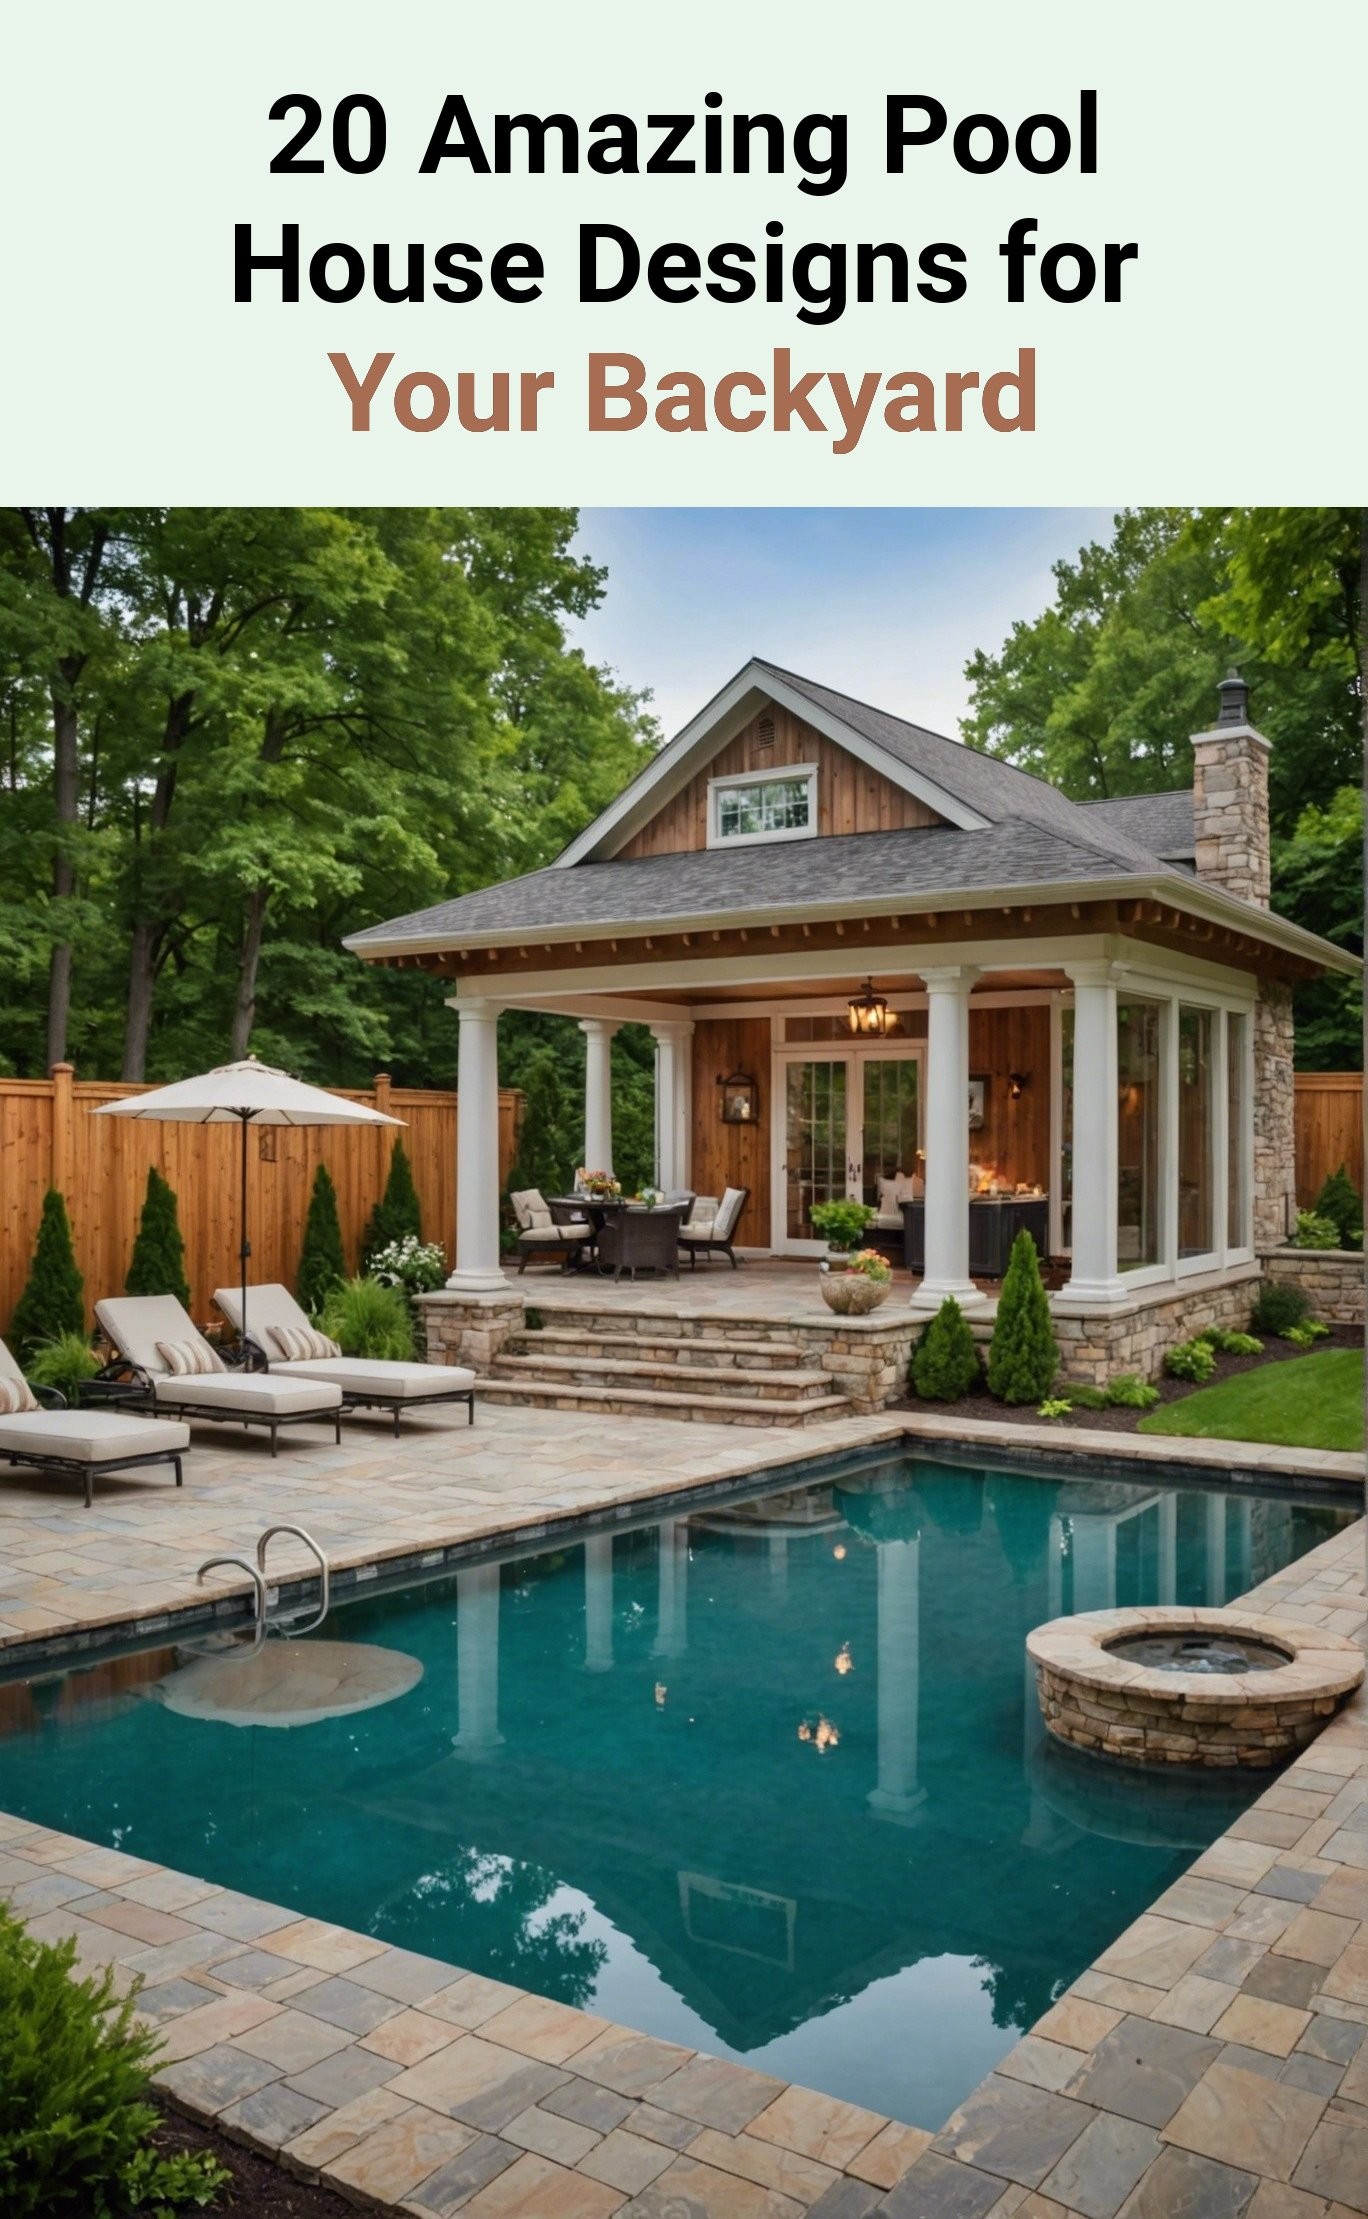 20 Amazing Pool House Designs for Your Backyard